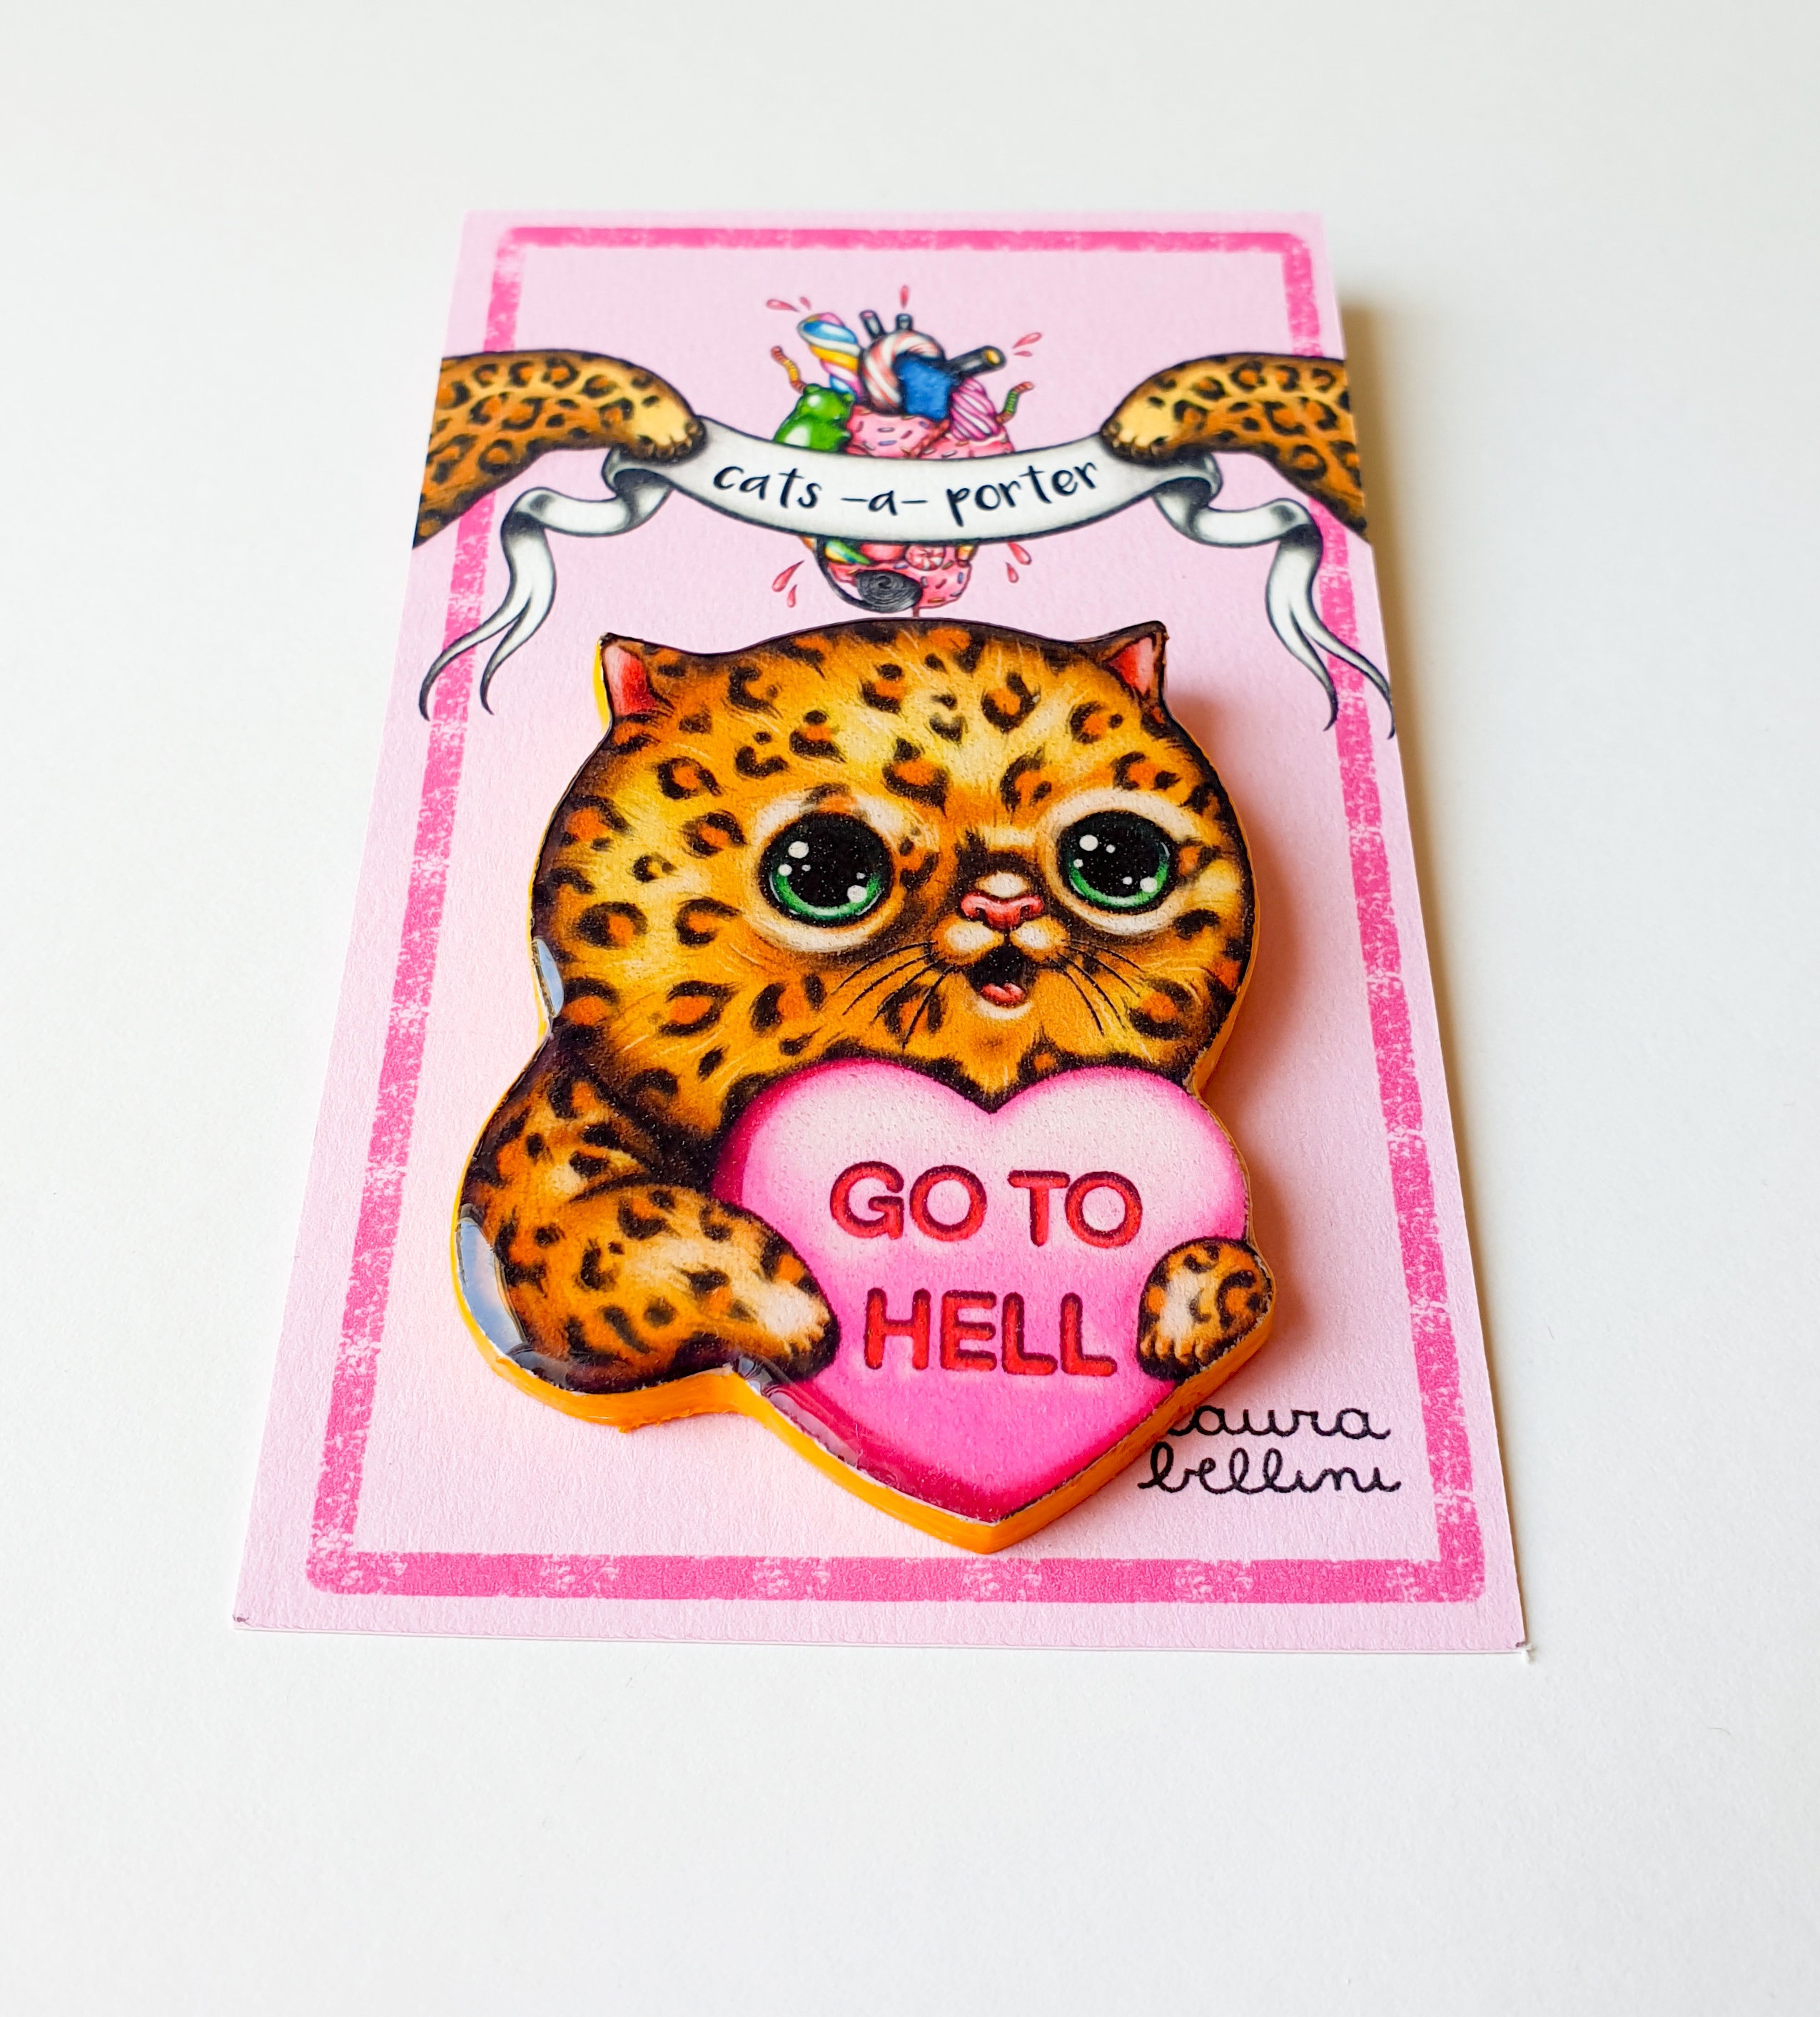 Cat holding a I hate you conversation heart handmade wooden pin for haters